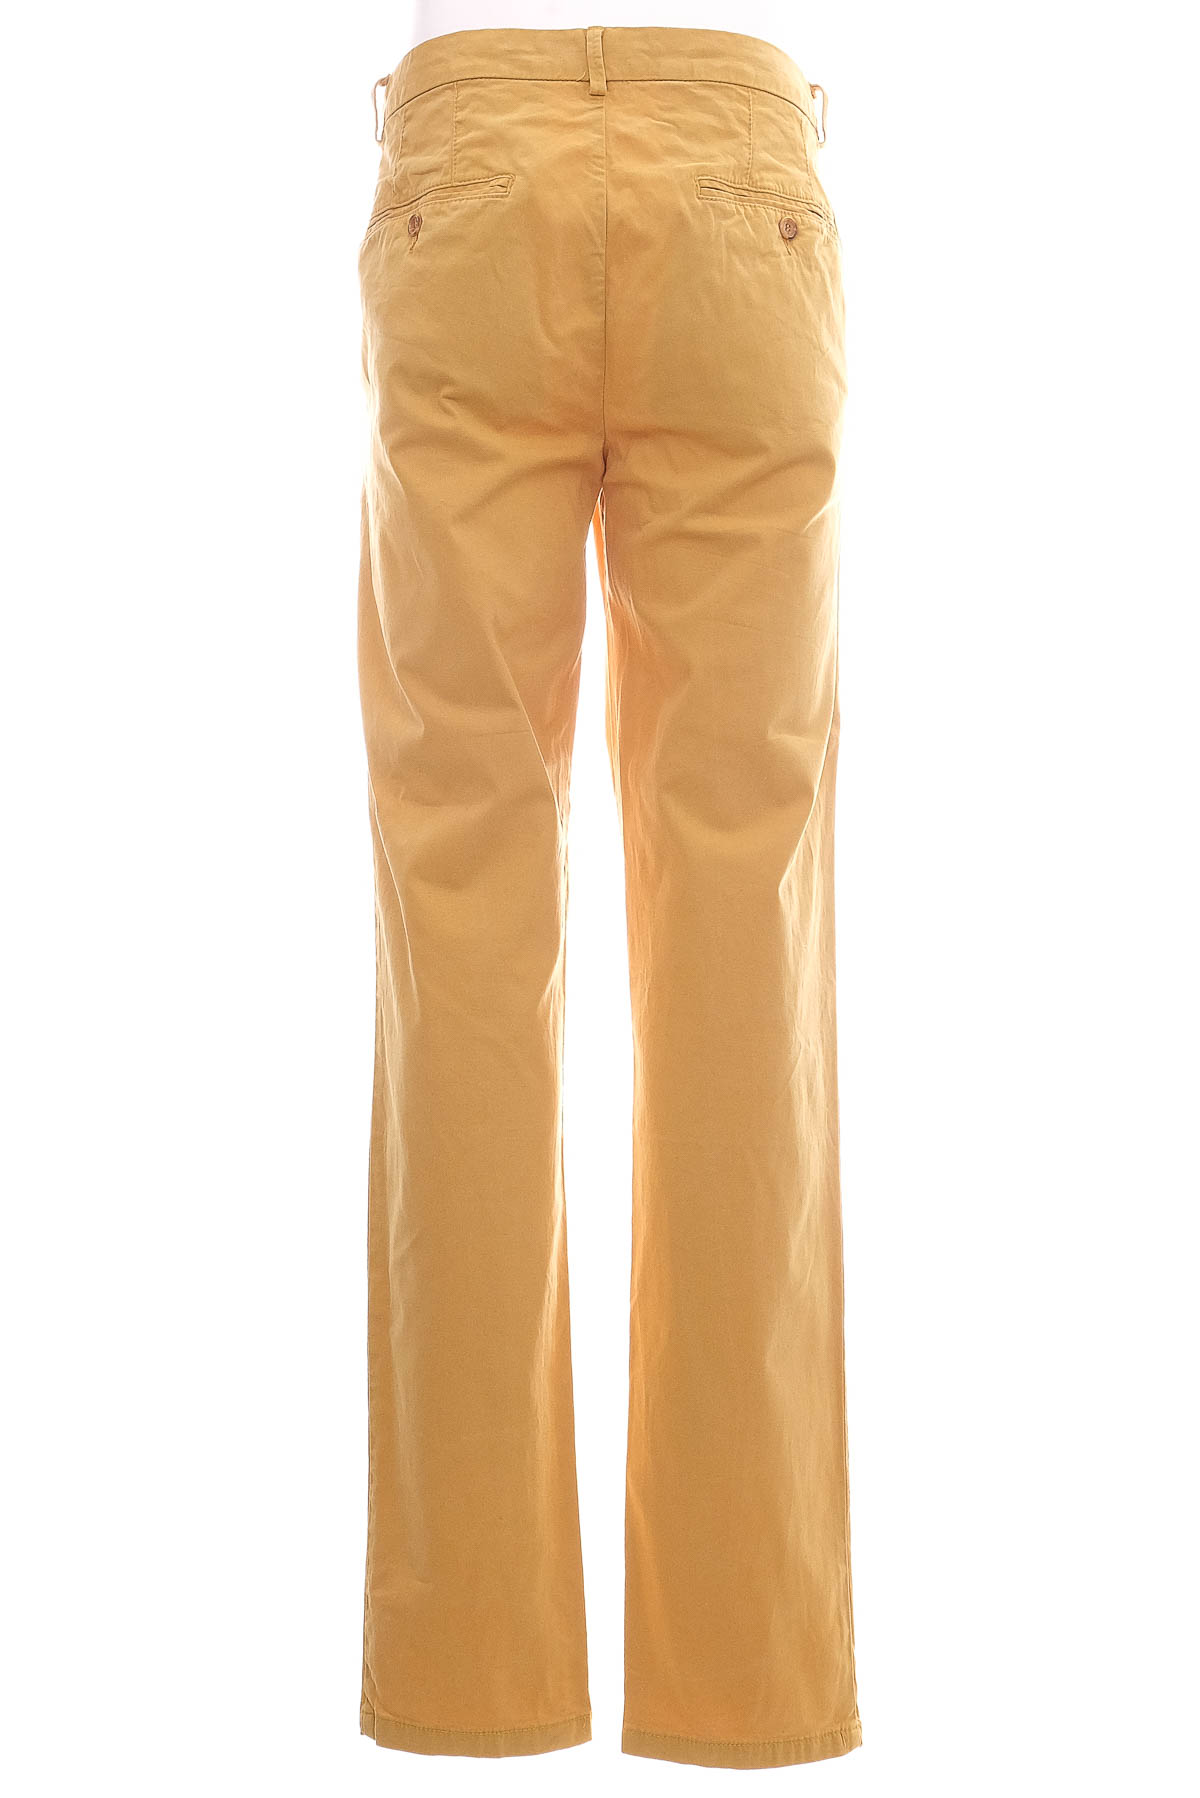 Men's trousers - United Colors of Benetton - 1